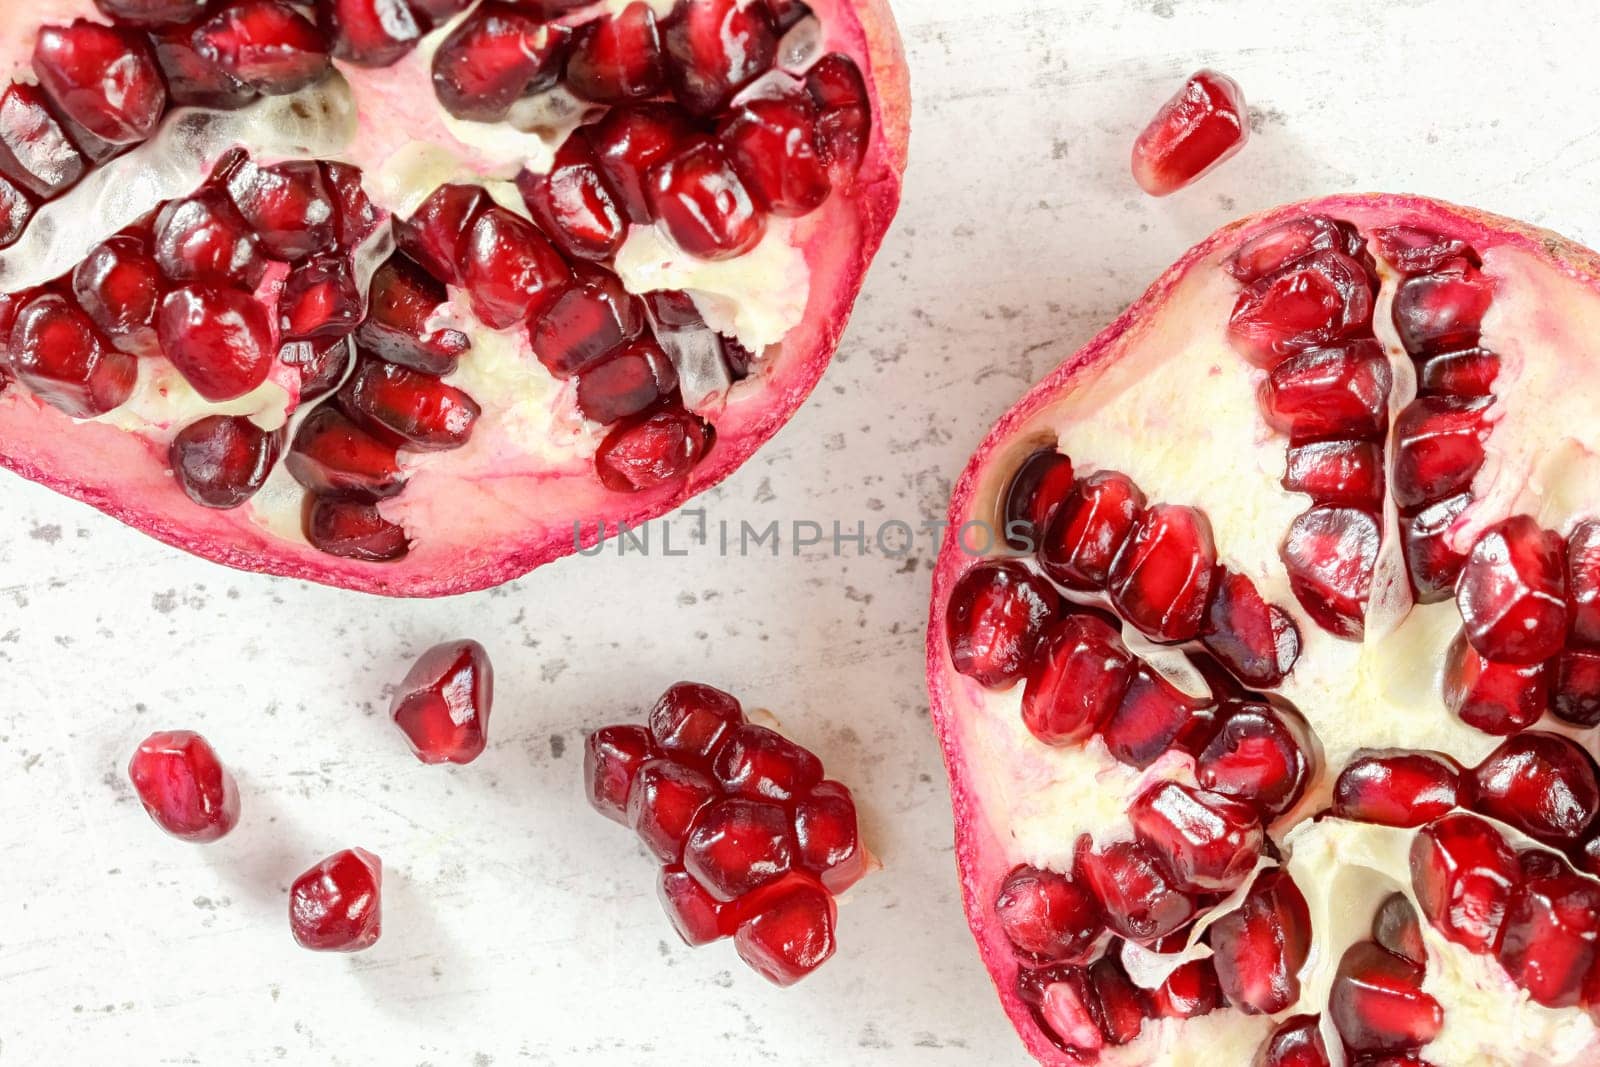 Pomegranate halves, gem like fruits scattered on white board, photo from above. by Ivanko